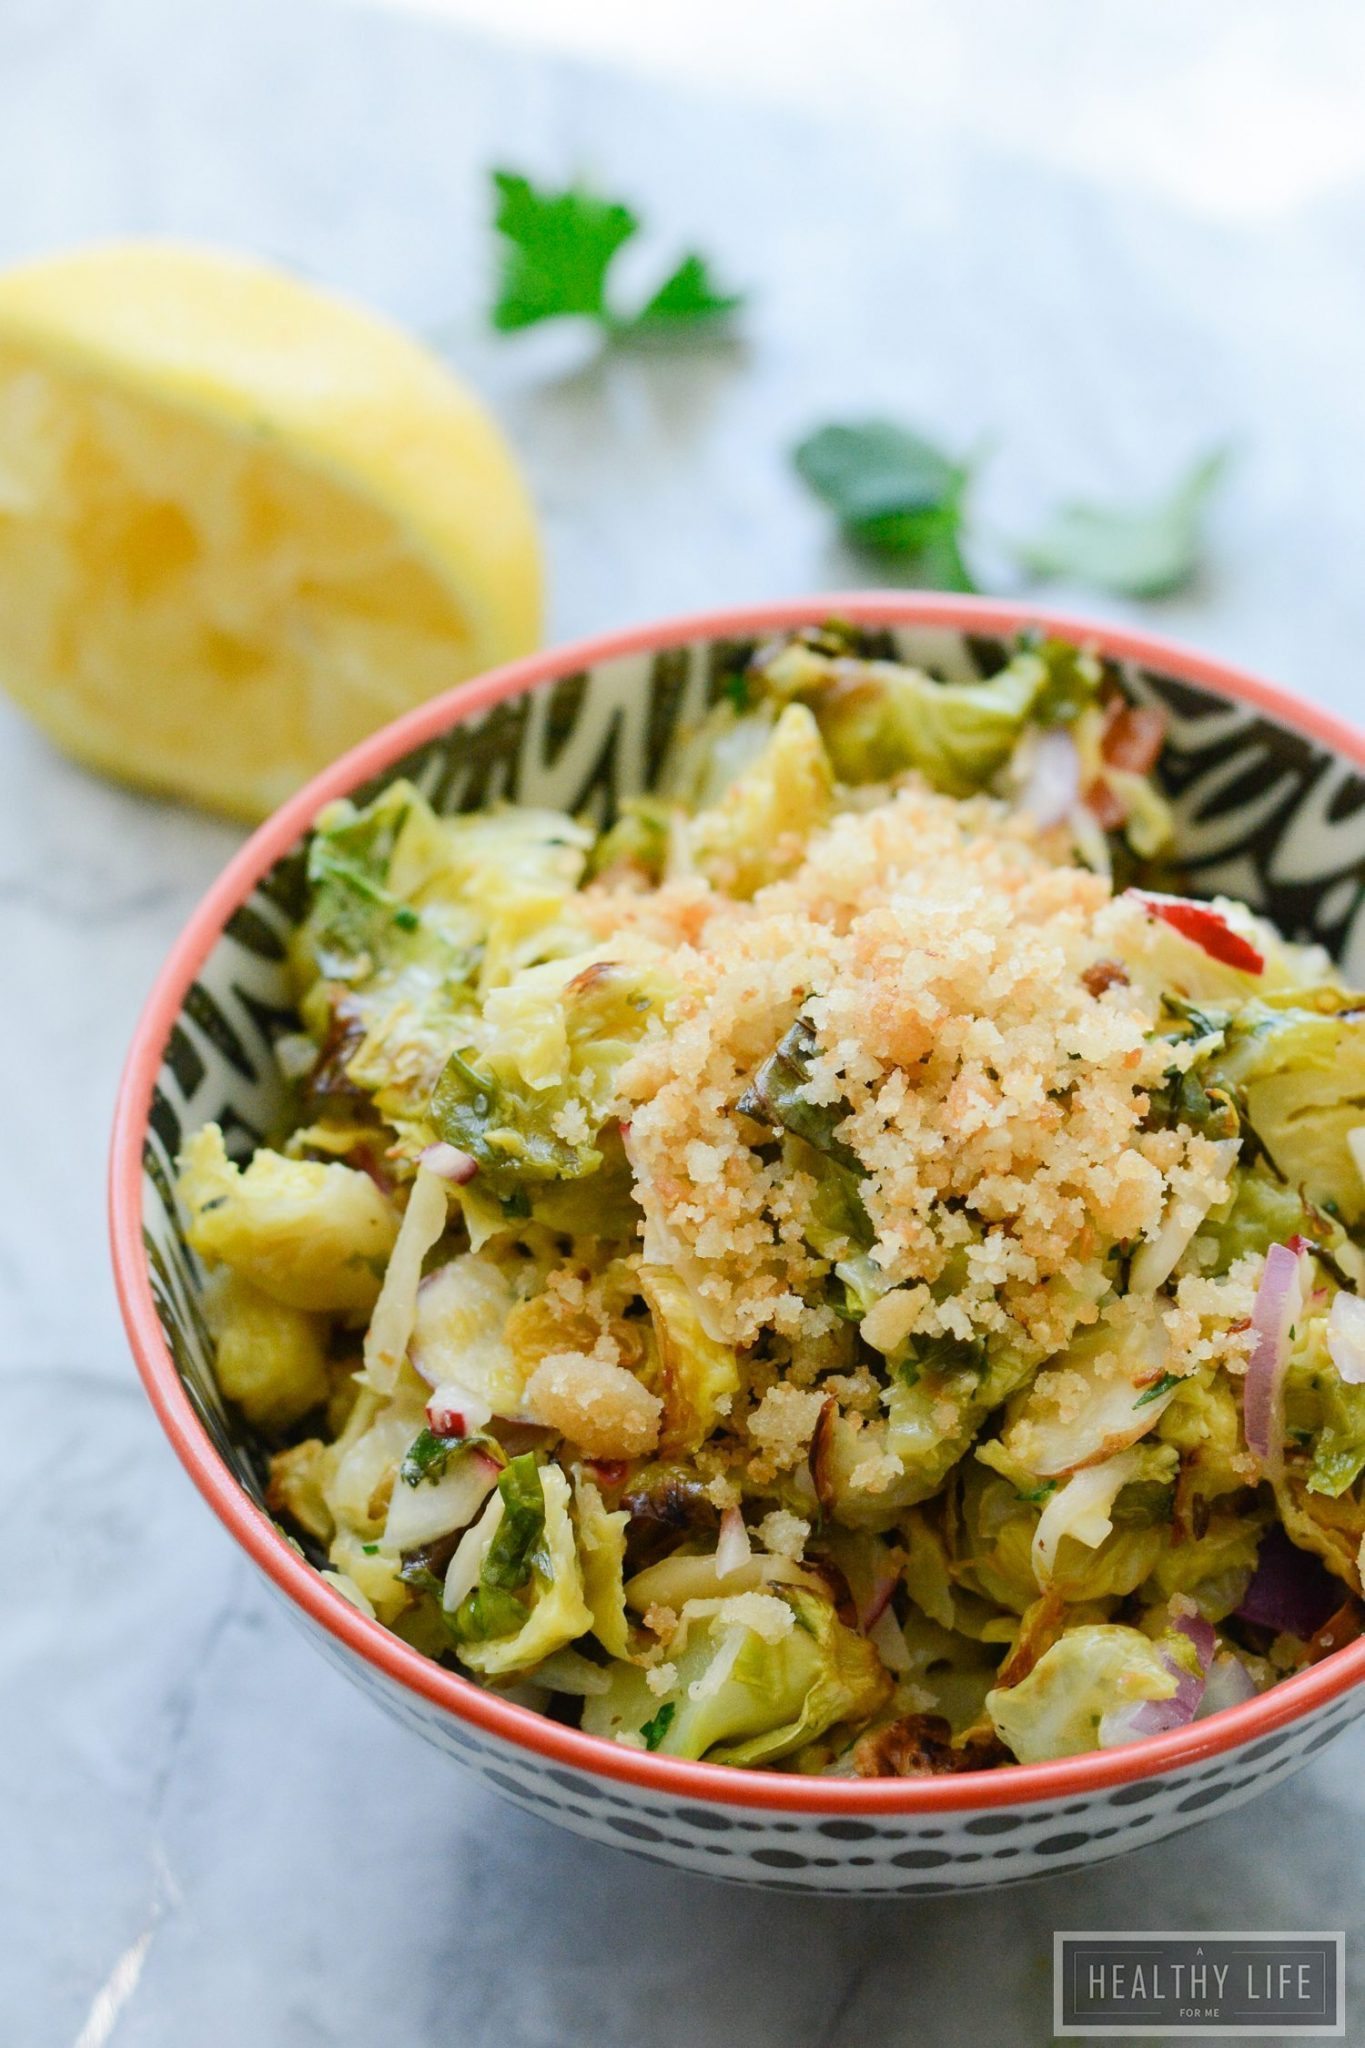 Roasted Brussels Sprouts Slaw is a multi- layered salad that has so much delicious flavor and crunch. A super healthy, gluten free recipe that is loaded with nutritious clean ingredients | ahealthylifeforme.com